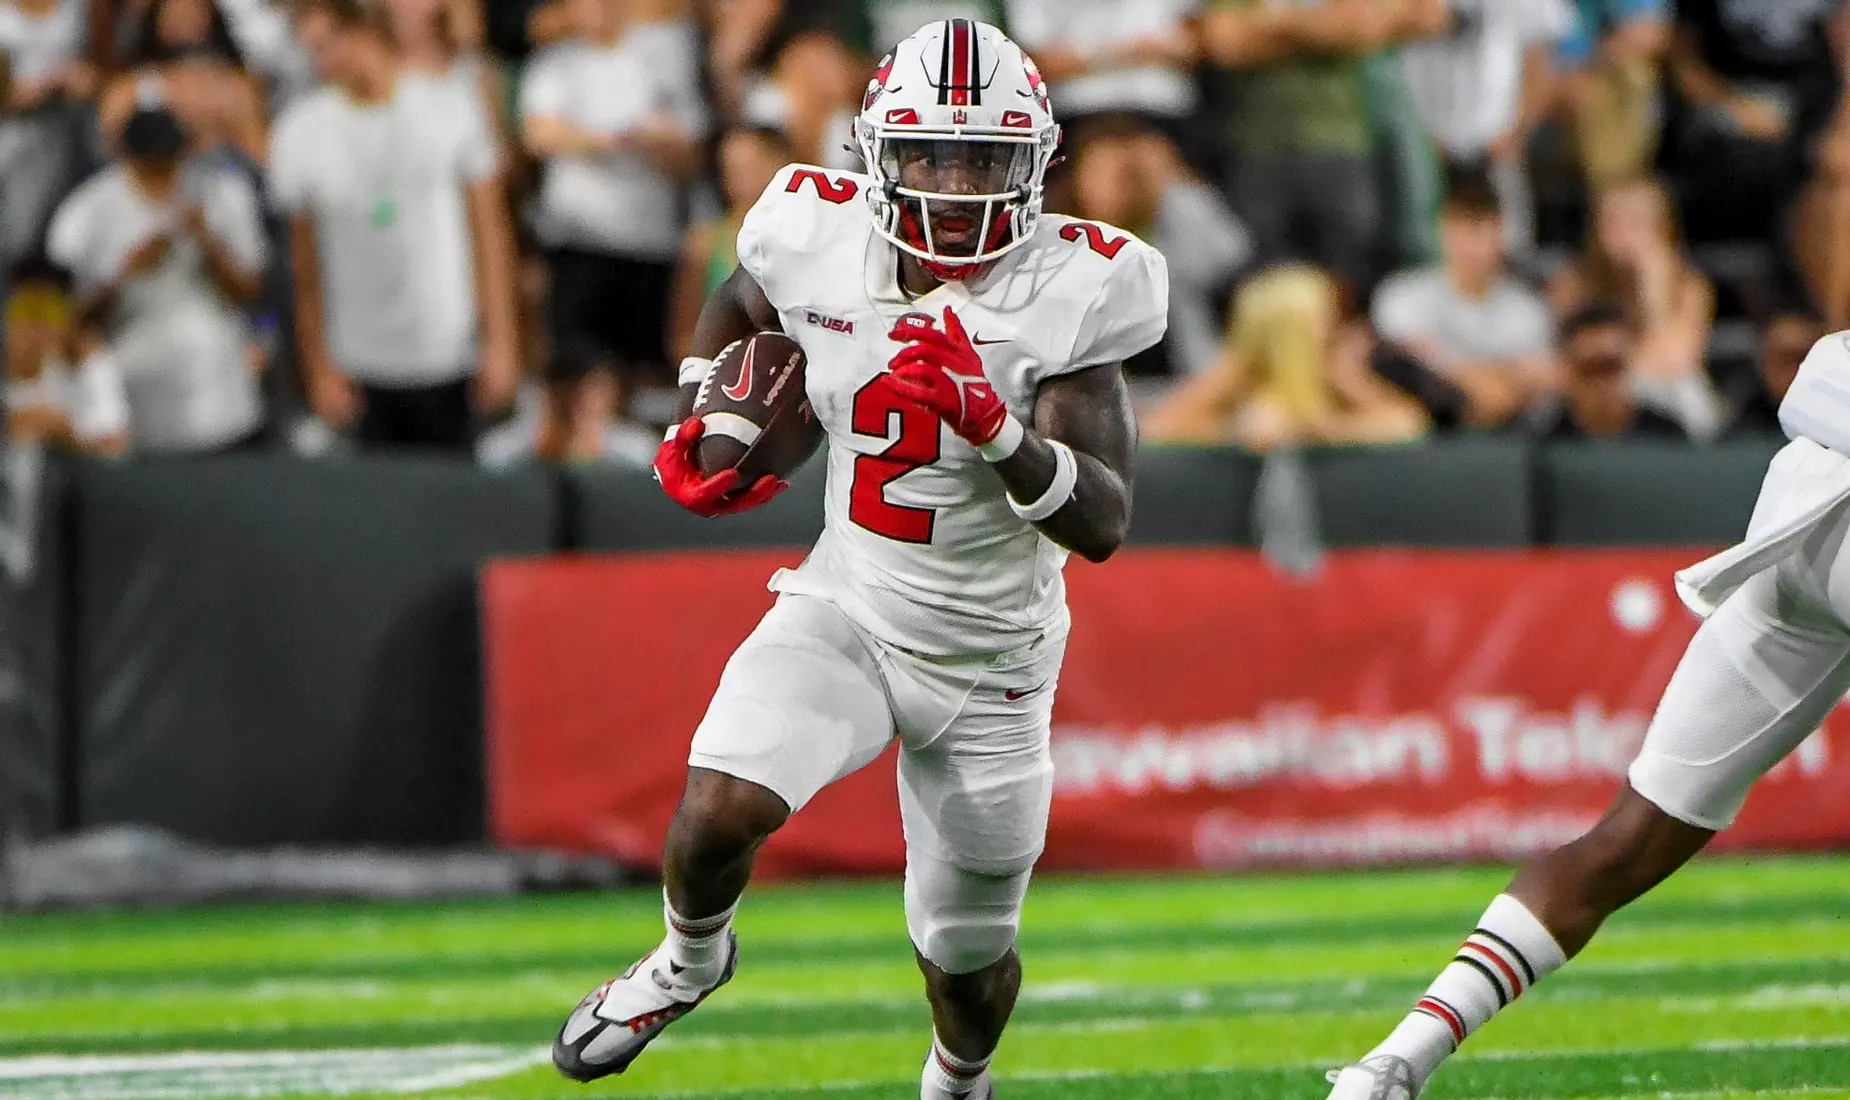 Davion Ervin-Poindexter is the starting tailback at Western Kentucky who shows patience and good decision making as a runner. Hula Bowl scout Justyce Gordon breaks him down as an NFL Prospect in his report.